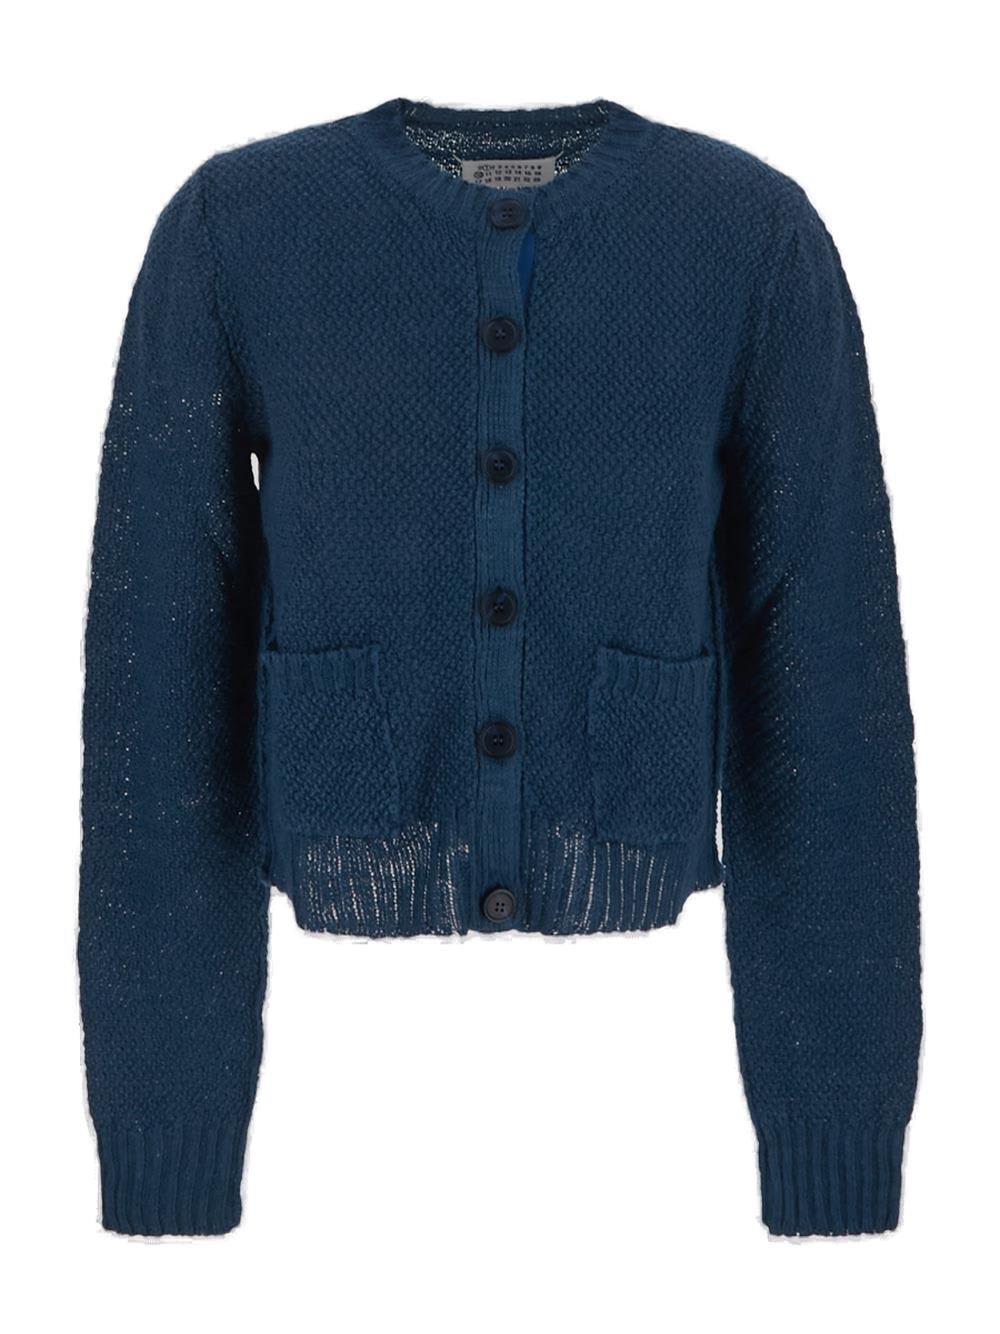 MAISON MARGIELA BUTTONED KNITTED CARDIGAN